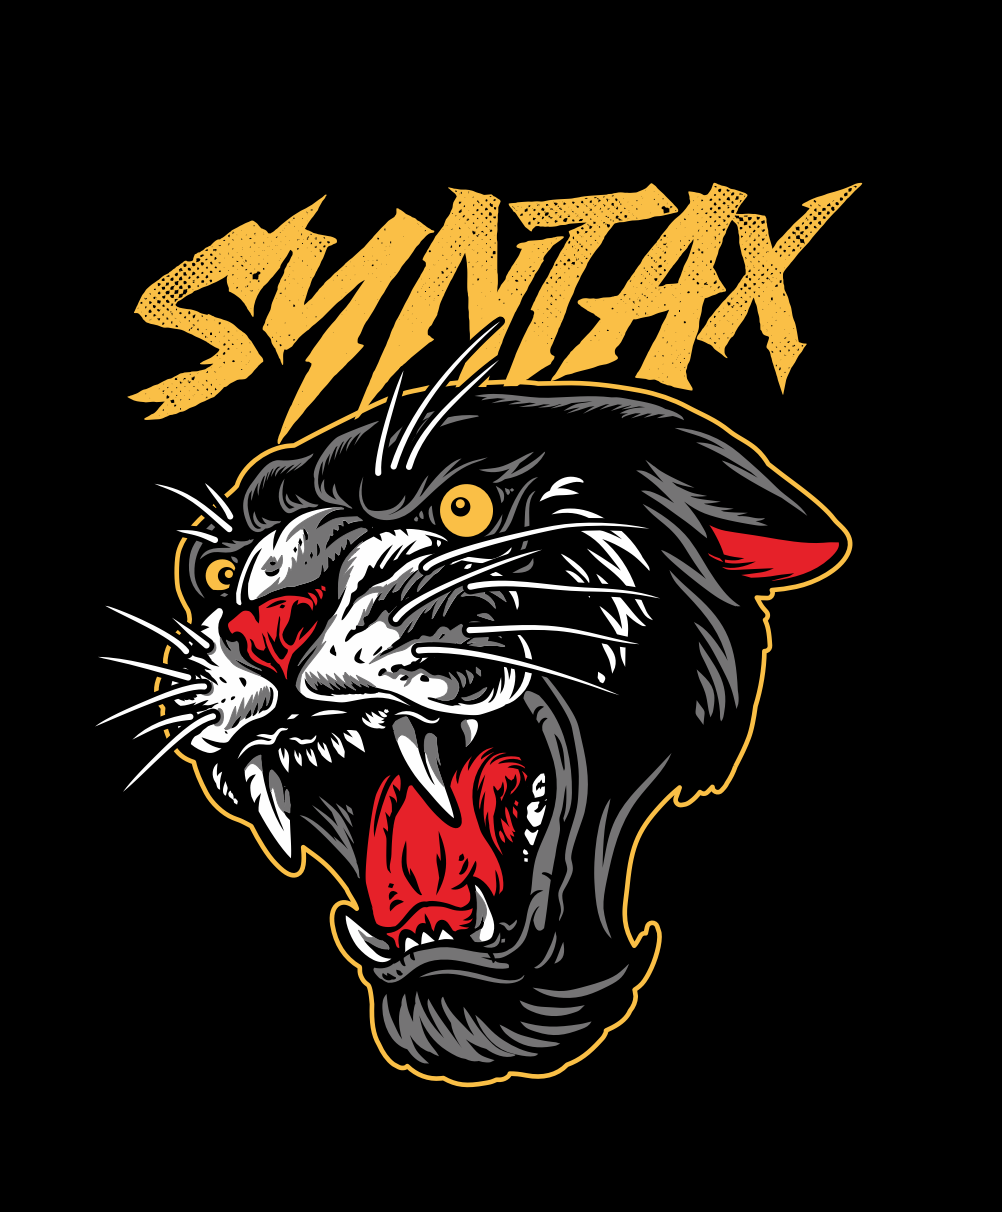 Syntax Panther Tee